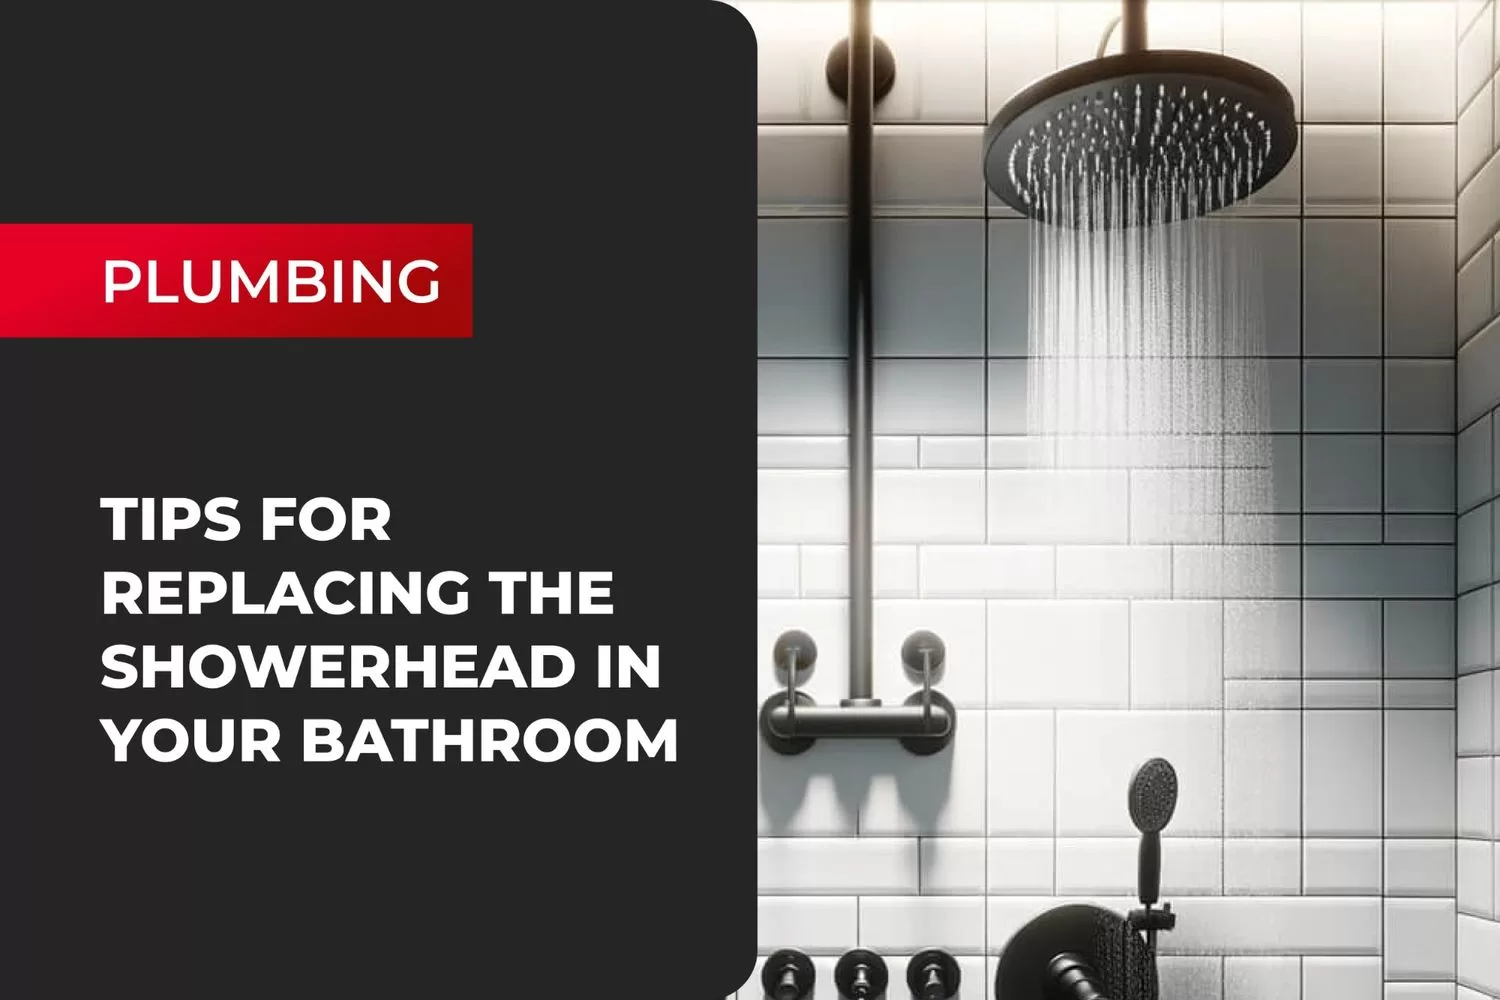 Tips for Replacing the Showerhead in Your Bathroom